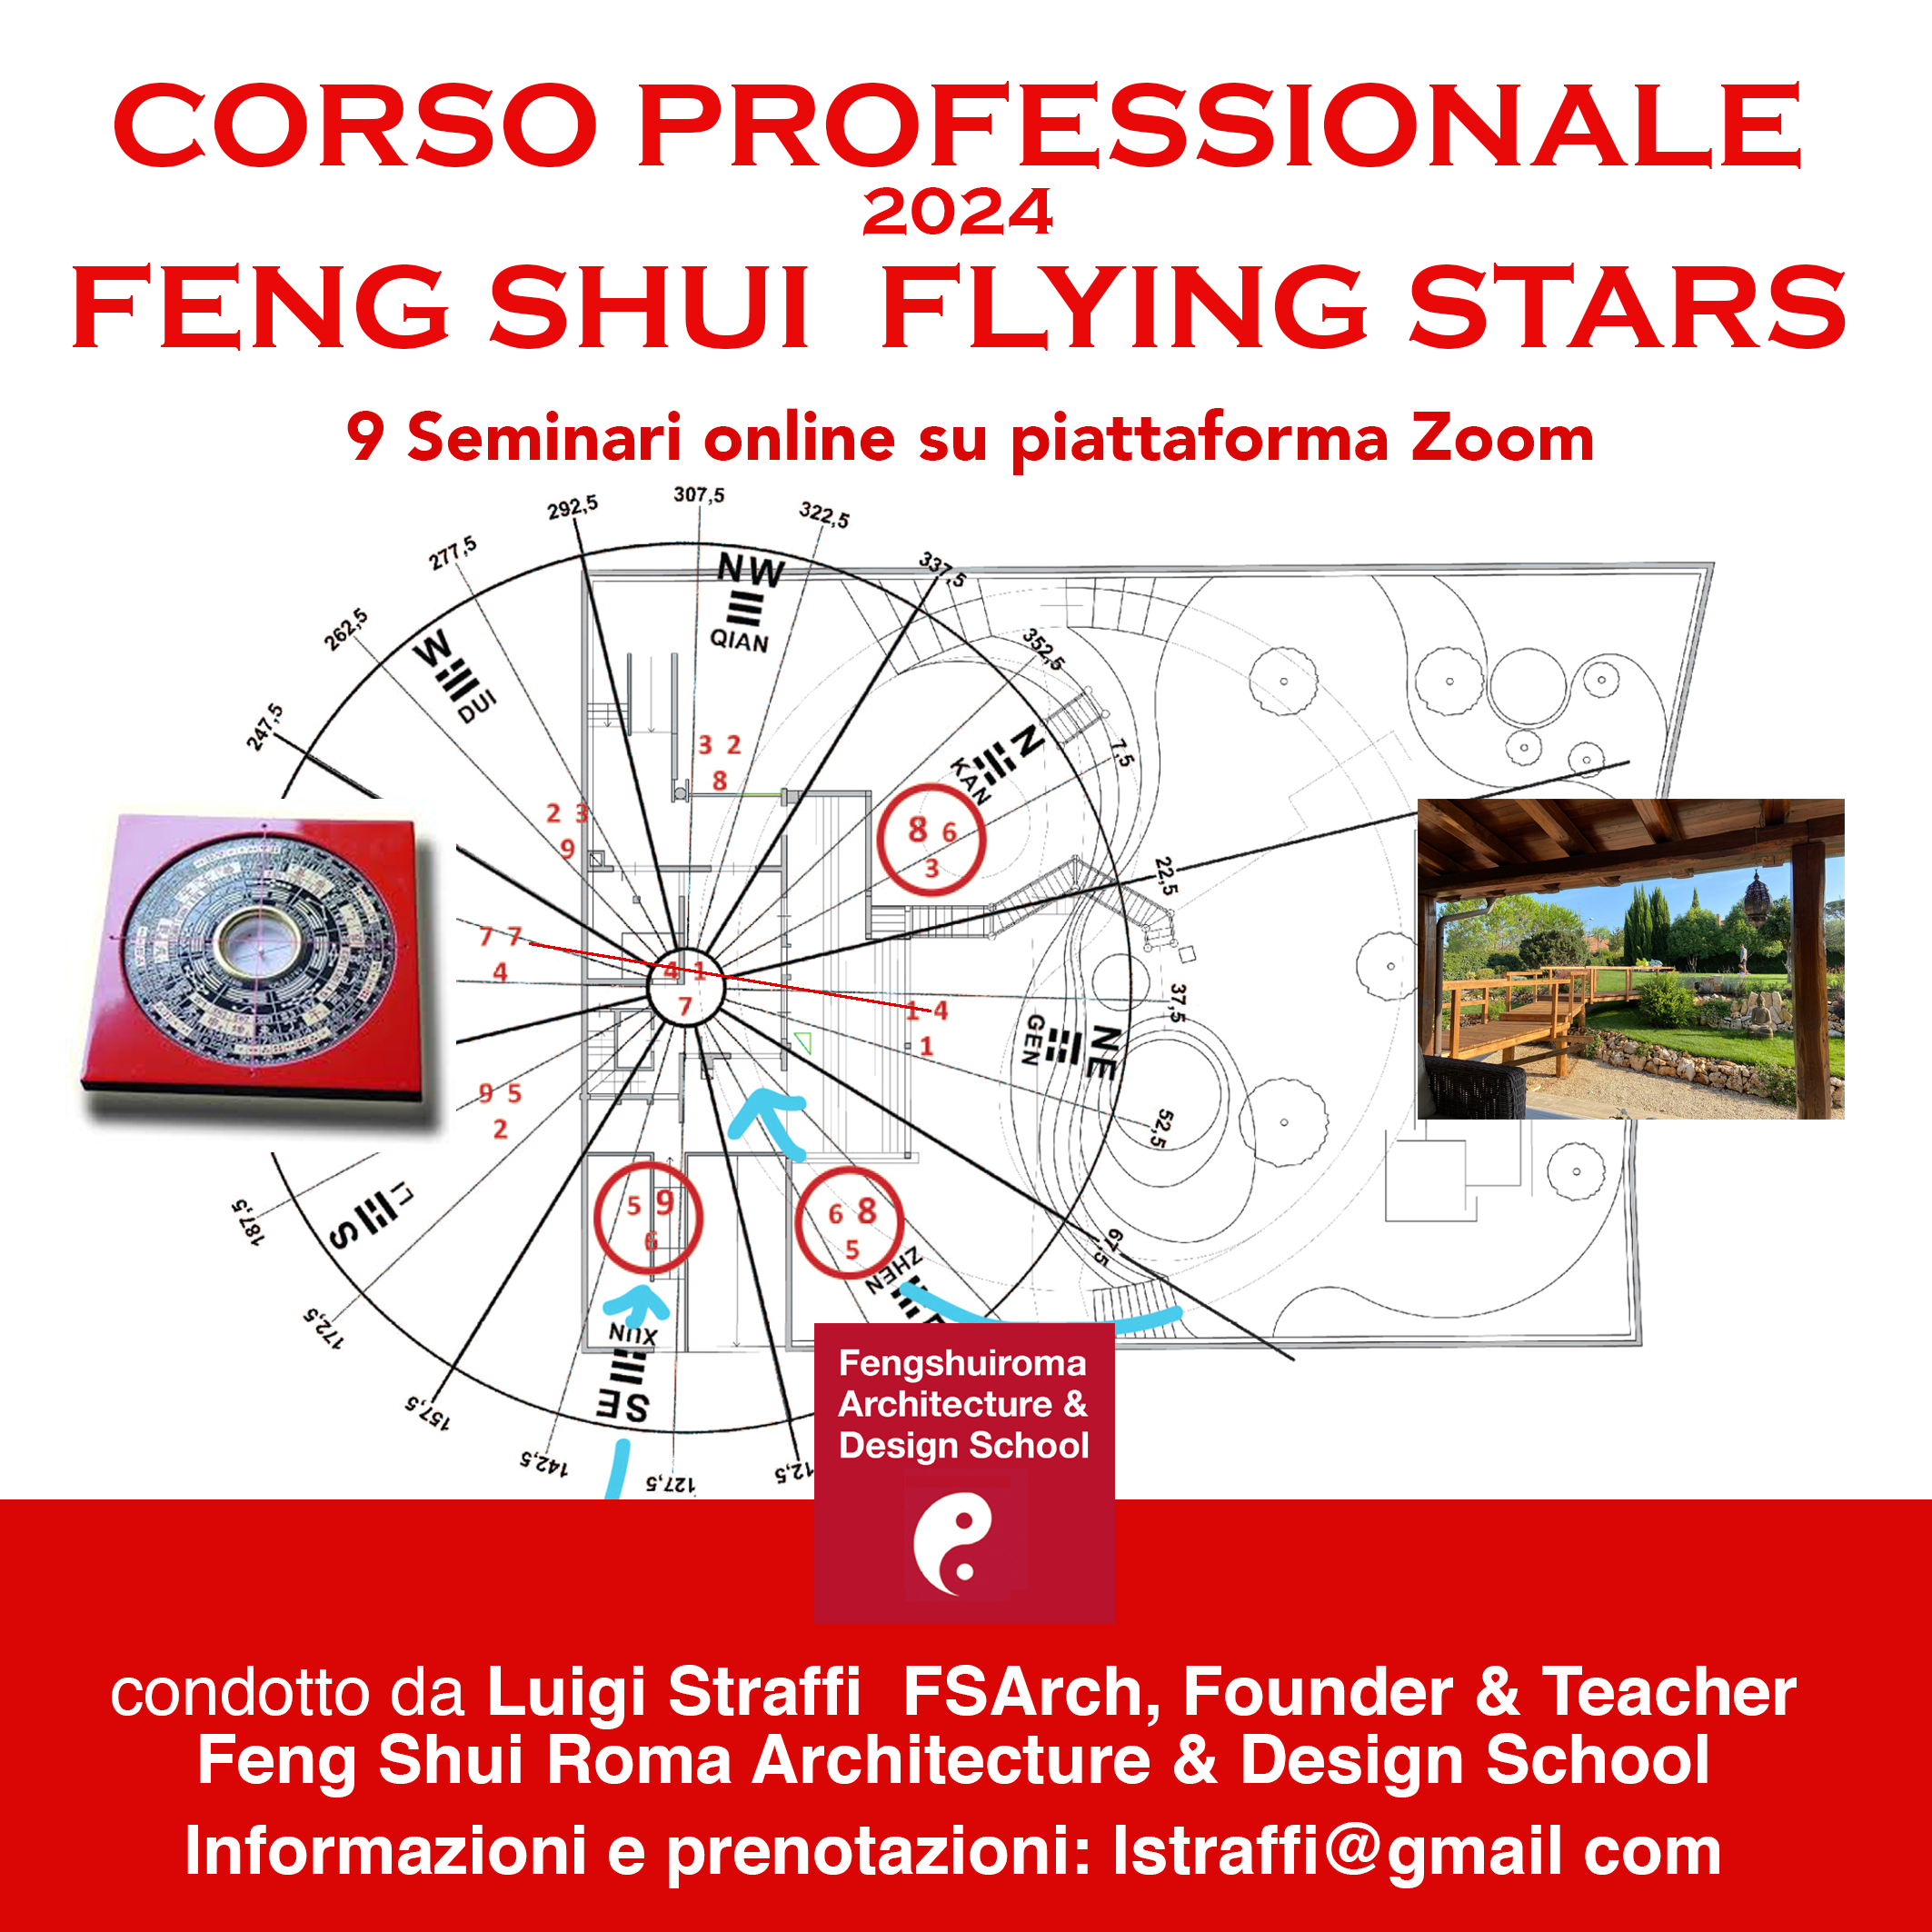 FENG SHUI FLYING STARS - CORSO PROFESSIONALE